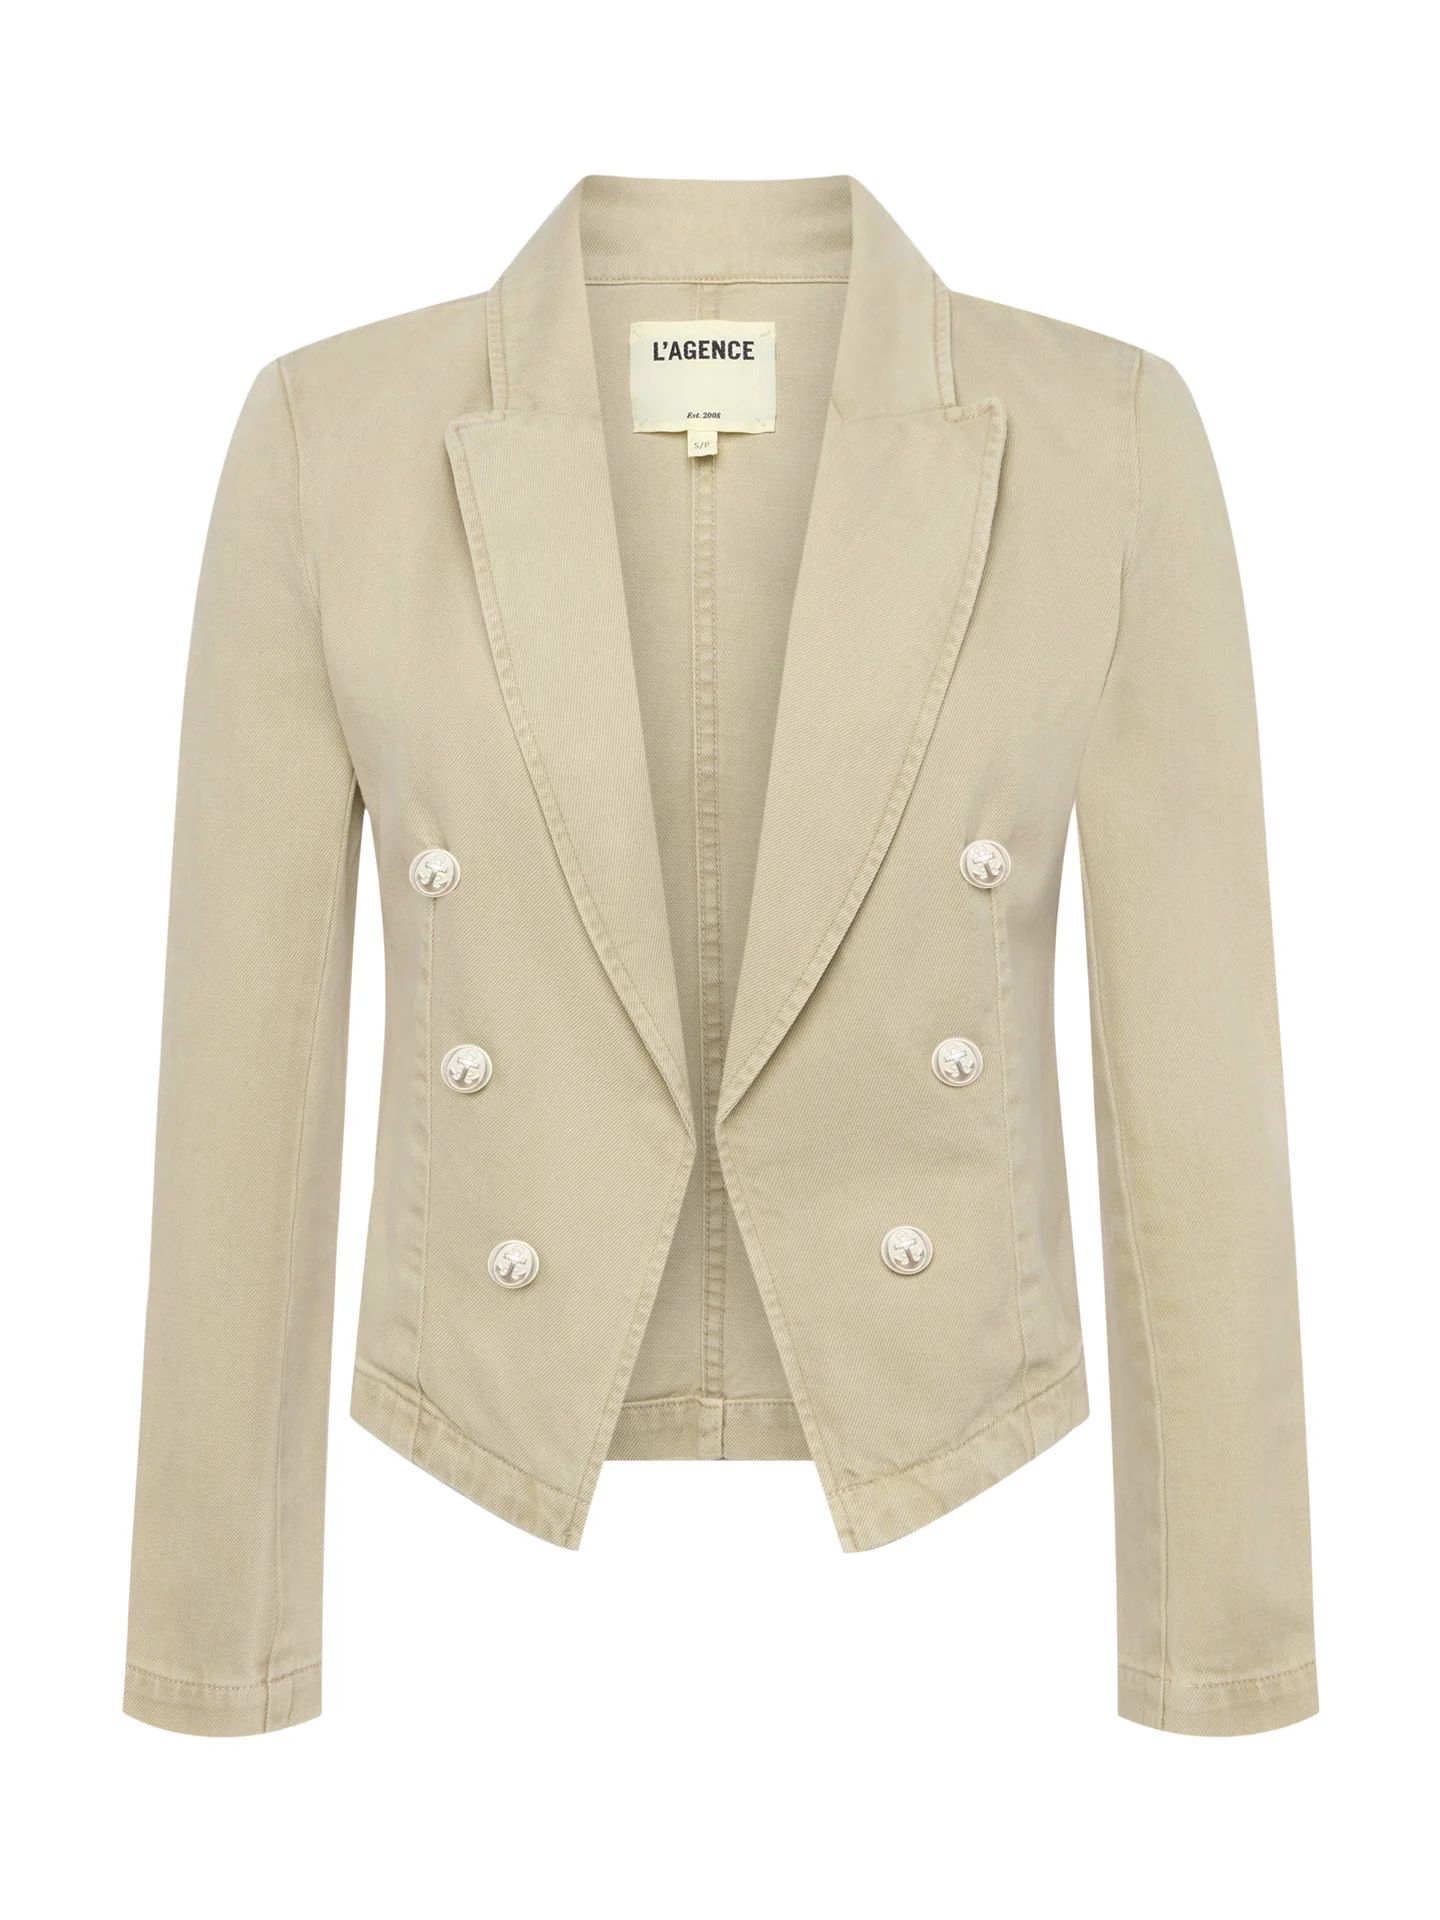 L'AGENCE - Wayne Open Front Double Breasted Denim Blazer in Sand Dune | L'Agence